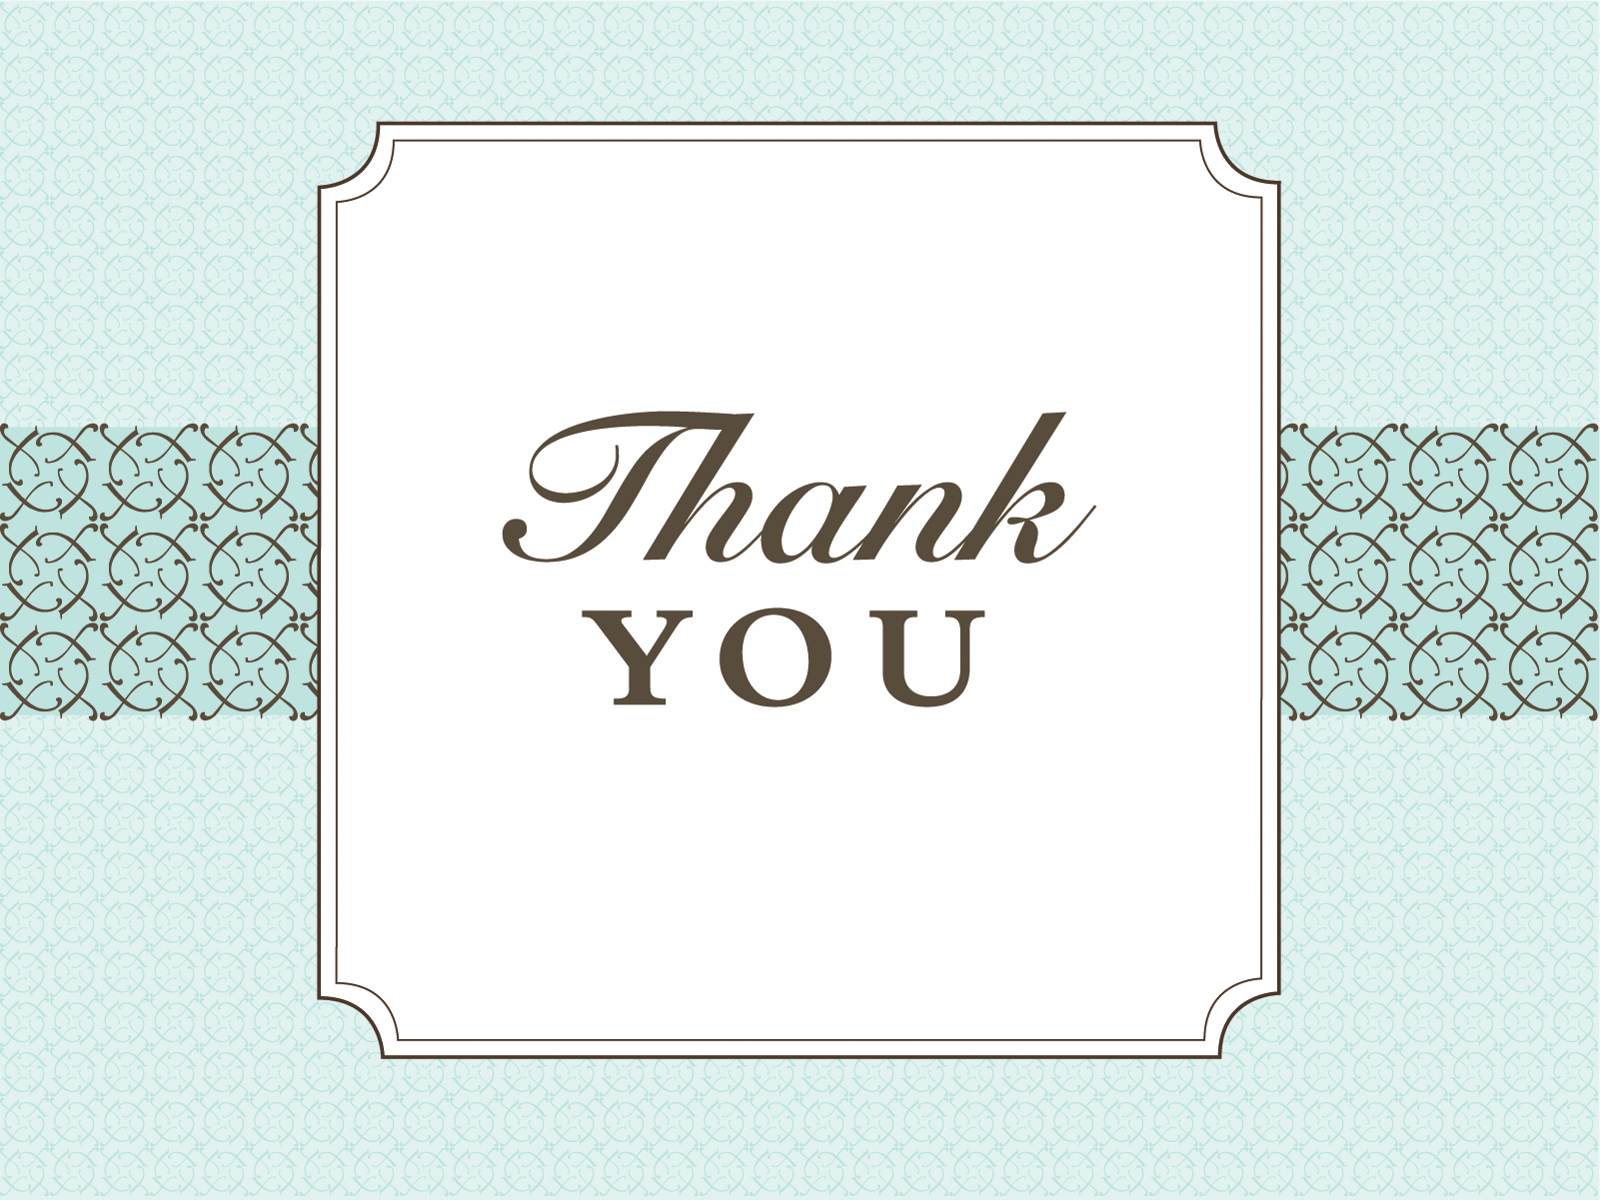 Thank You Slide Powerpoint Templates - Aqua / Cyan, Beauty & Fashion,  Border & Frames, White - Free PPT Backgrounds and Templates